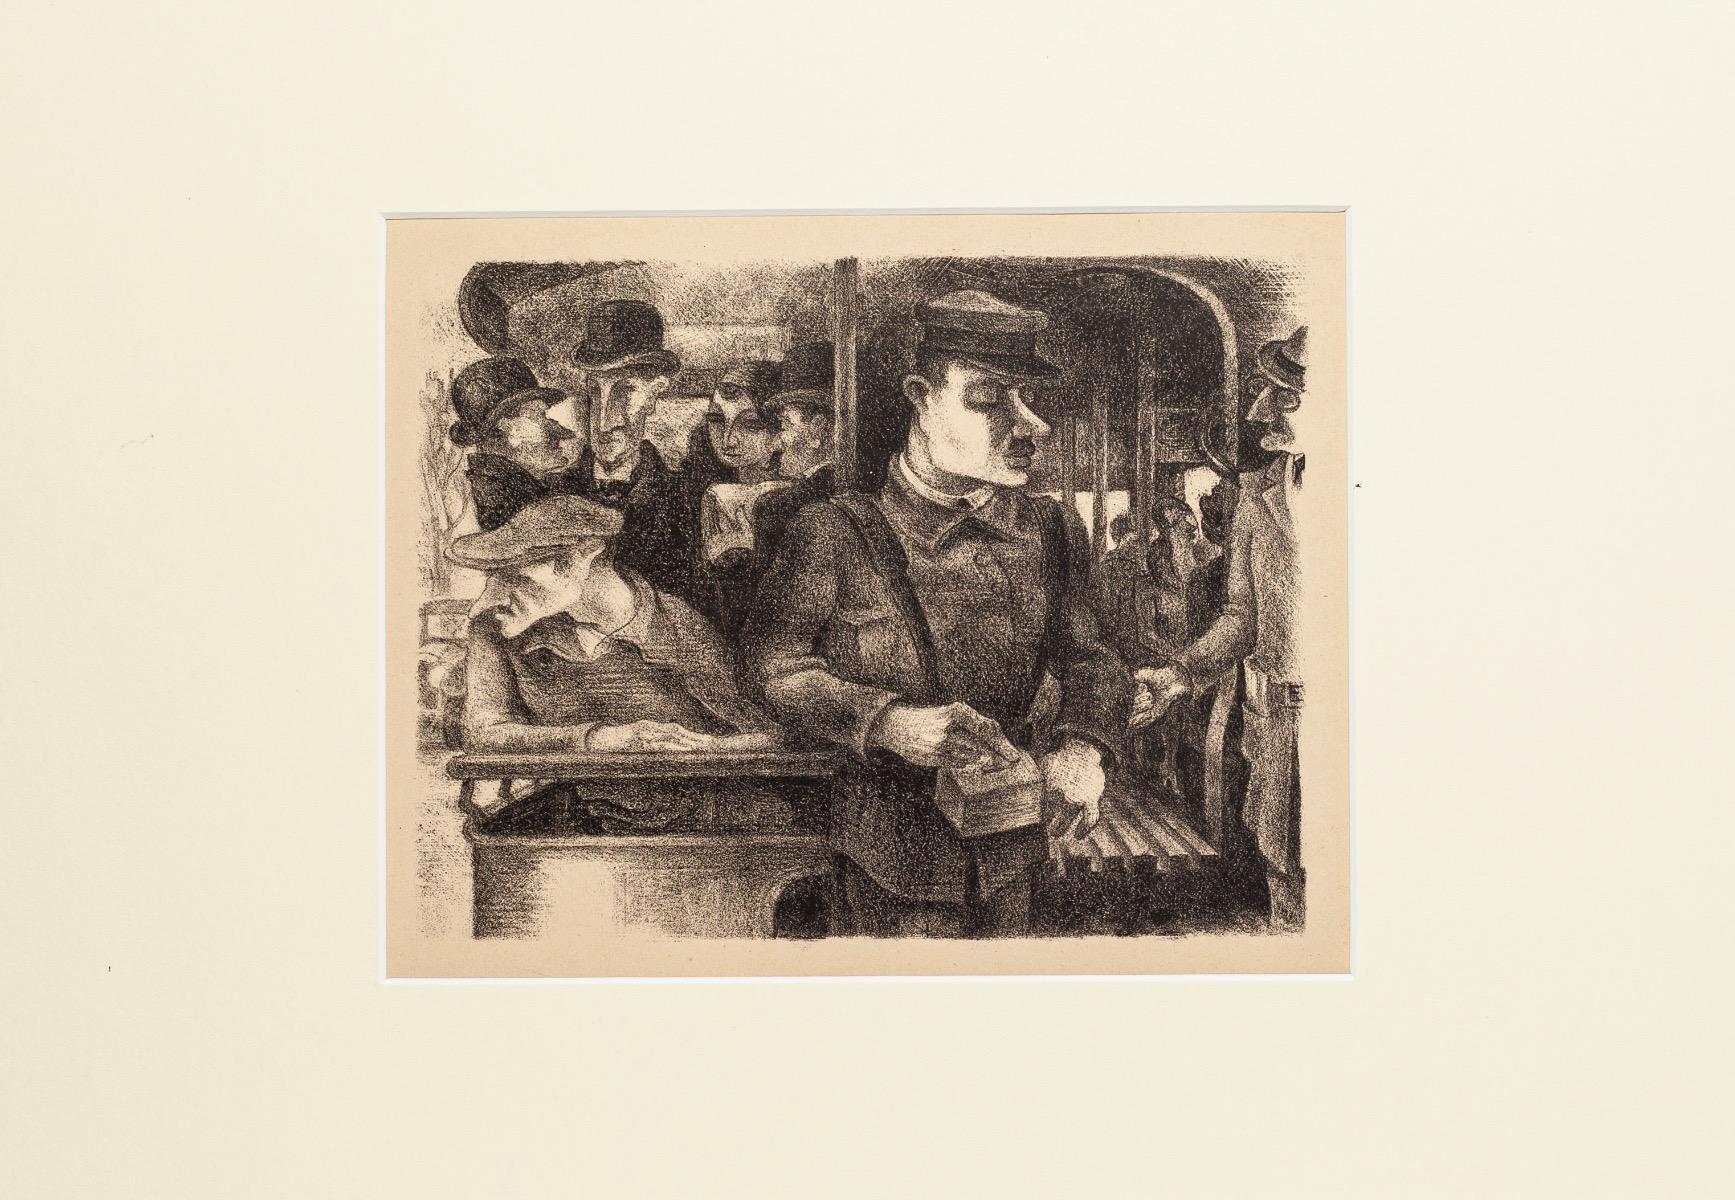 Passengers - Original Litograph by German Expressionist - 1930s - Print by Unknown